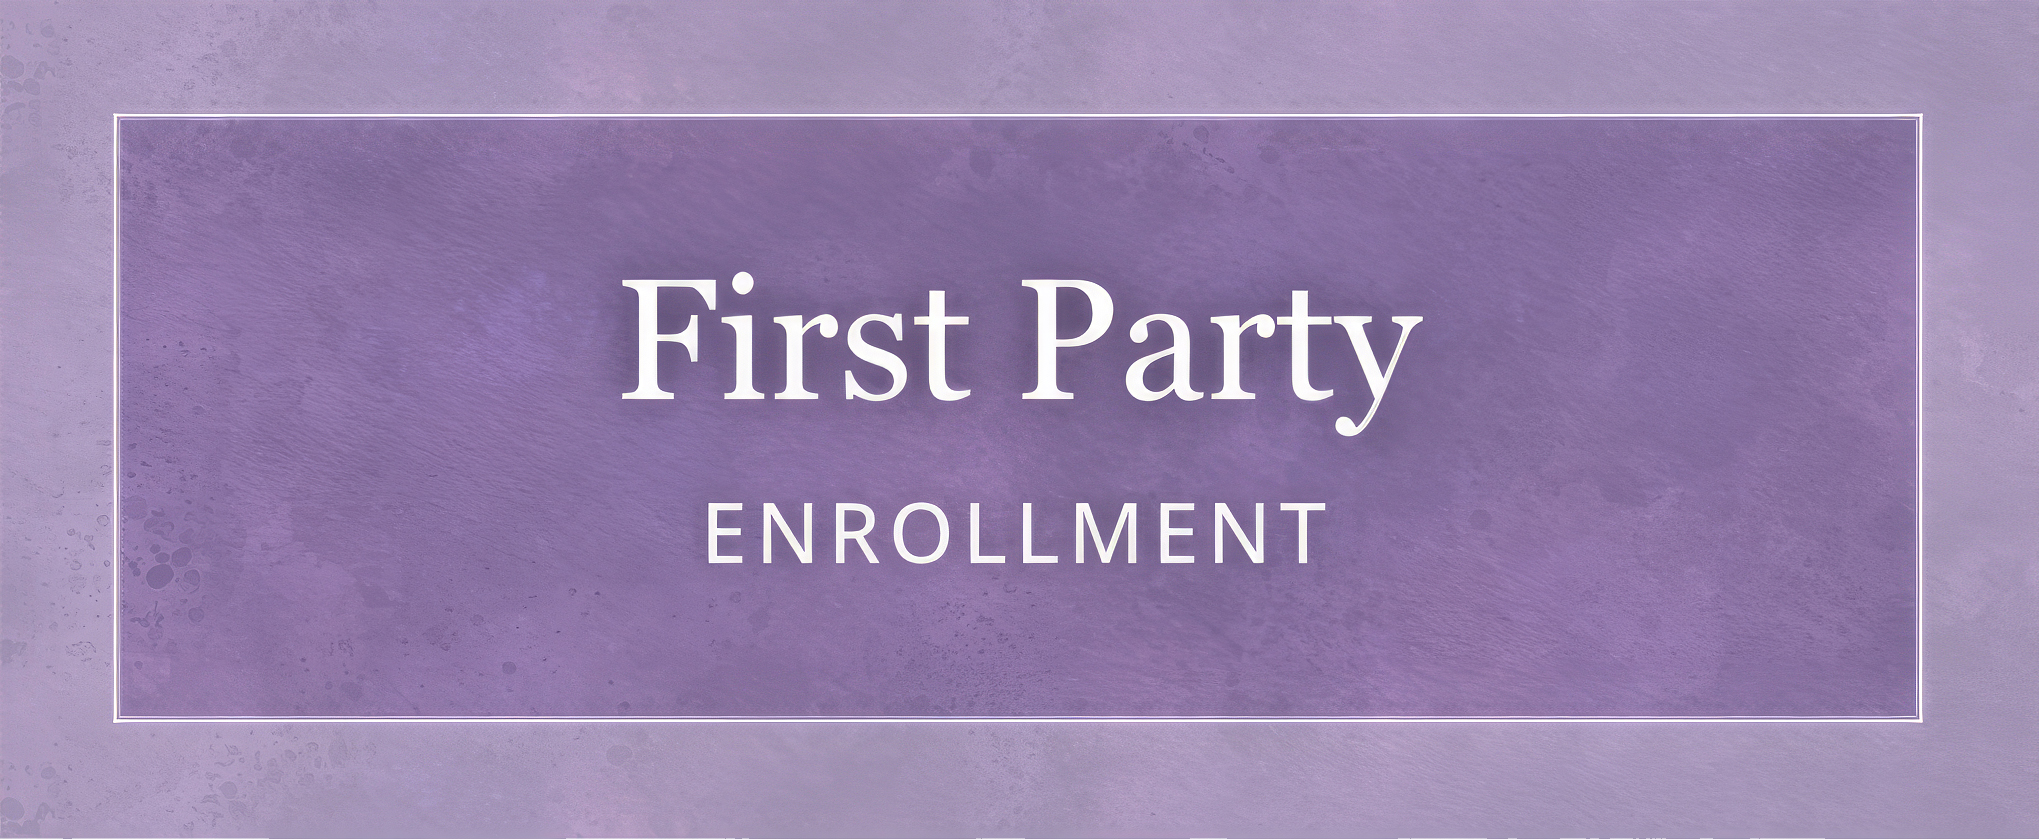 First Party Enrollment